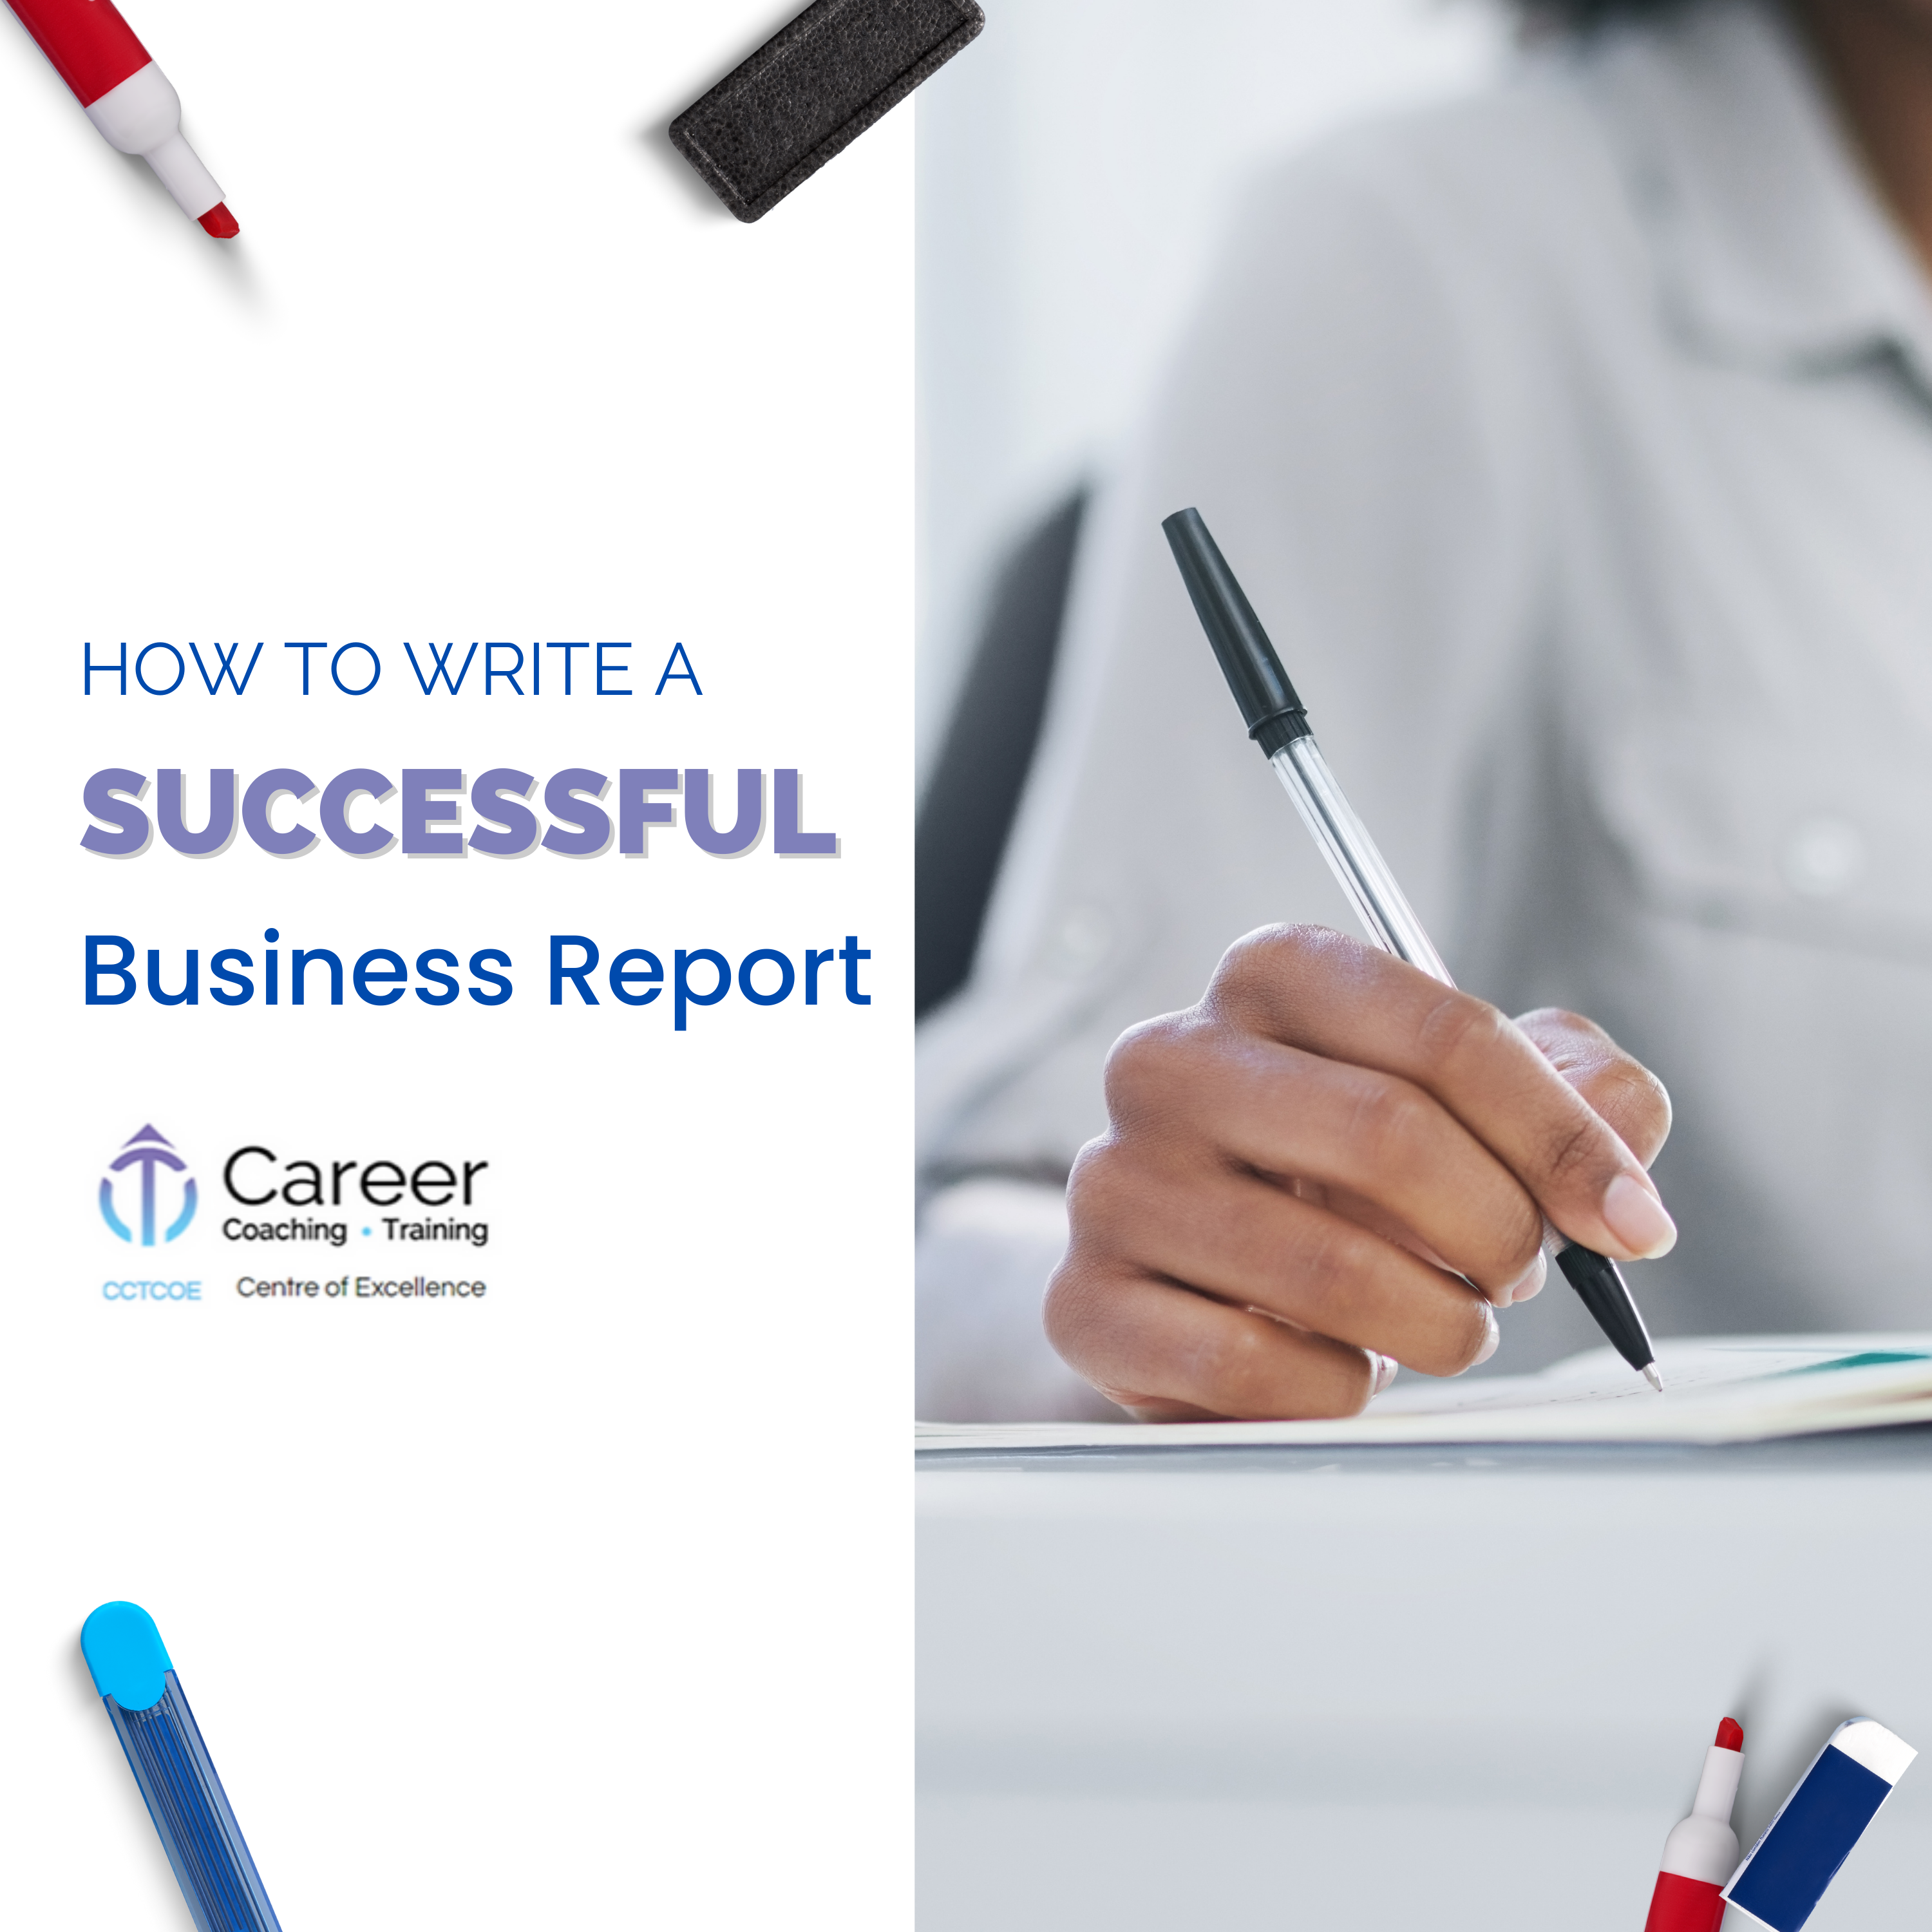 How To Write a Successful Business Report